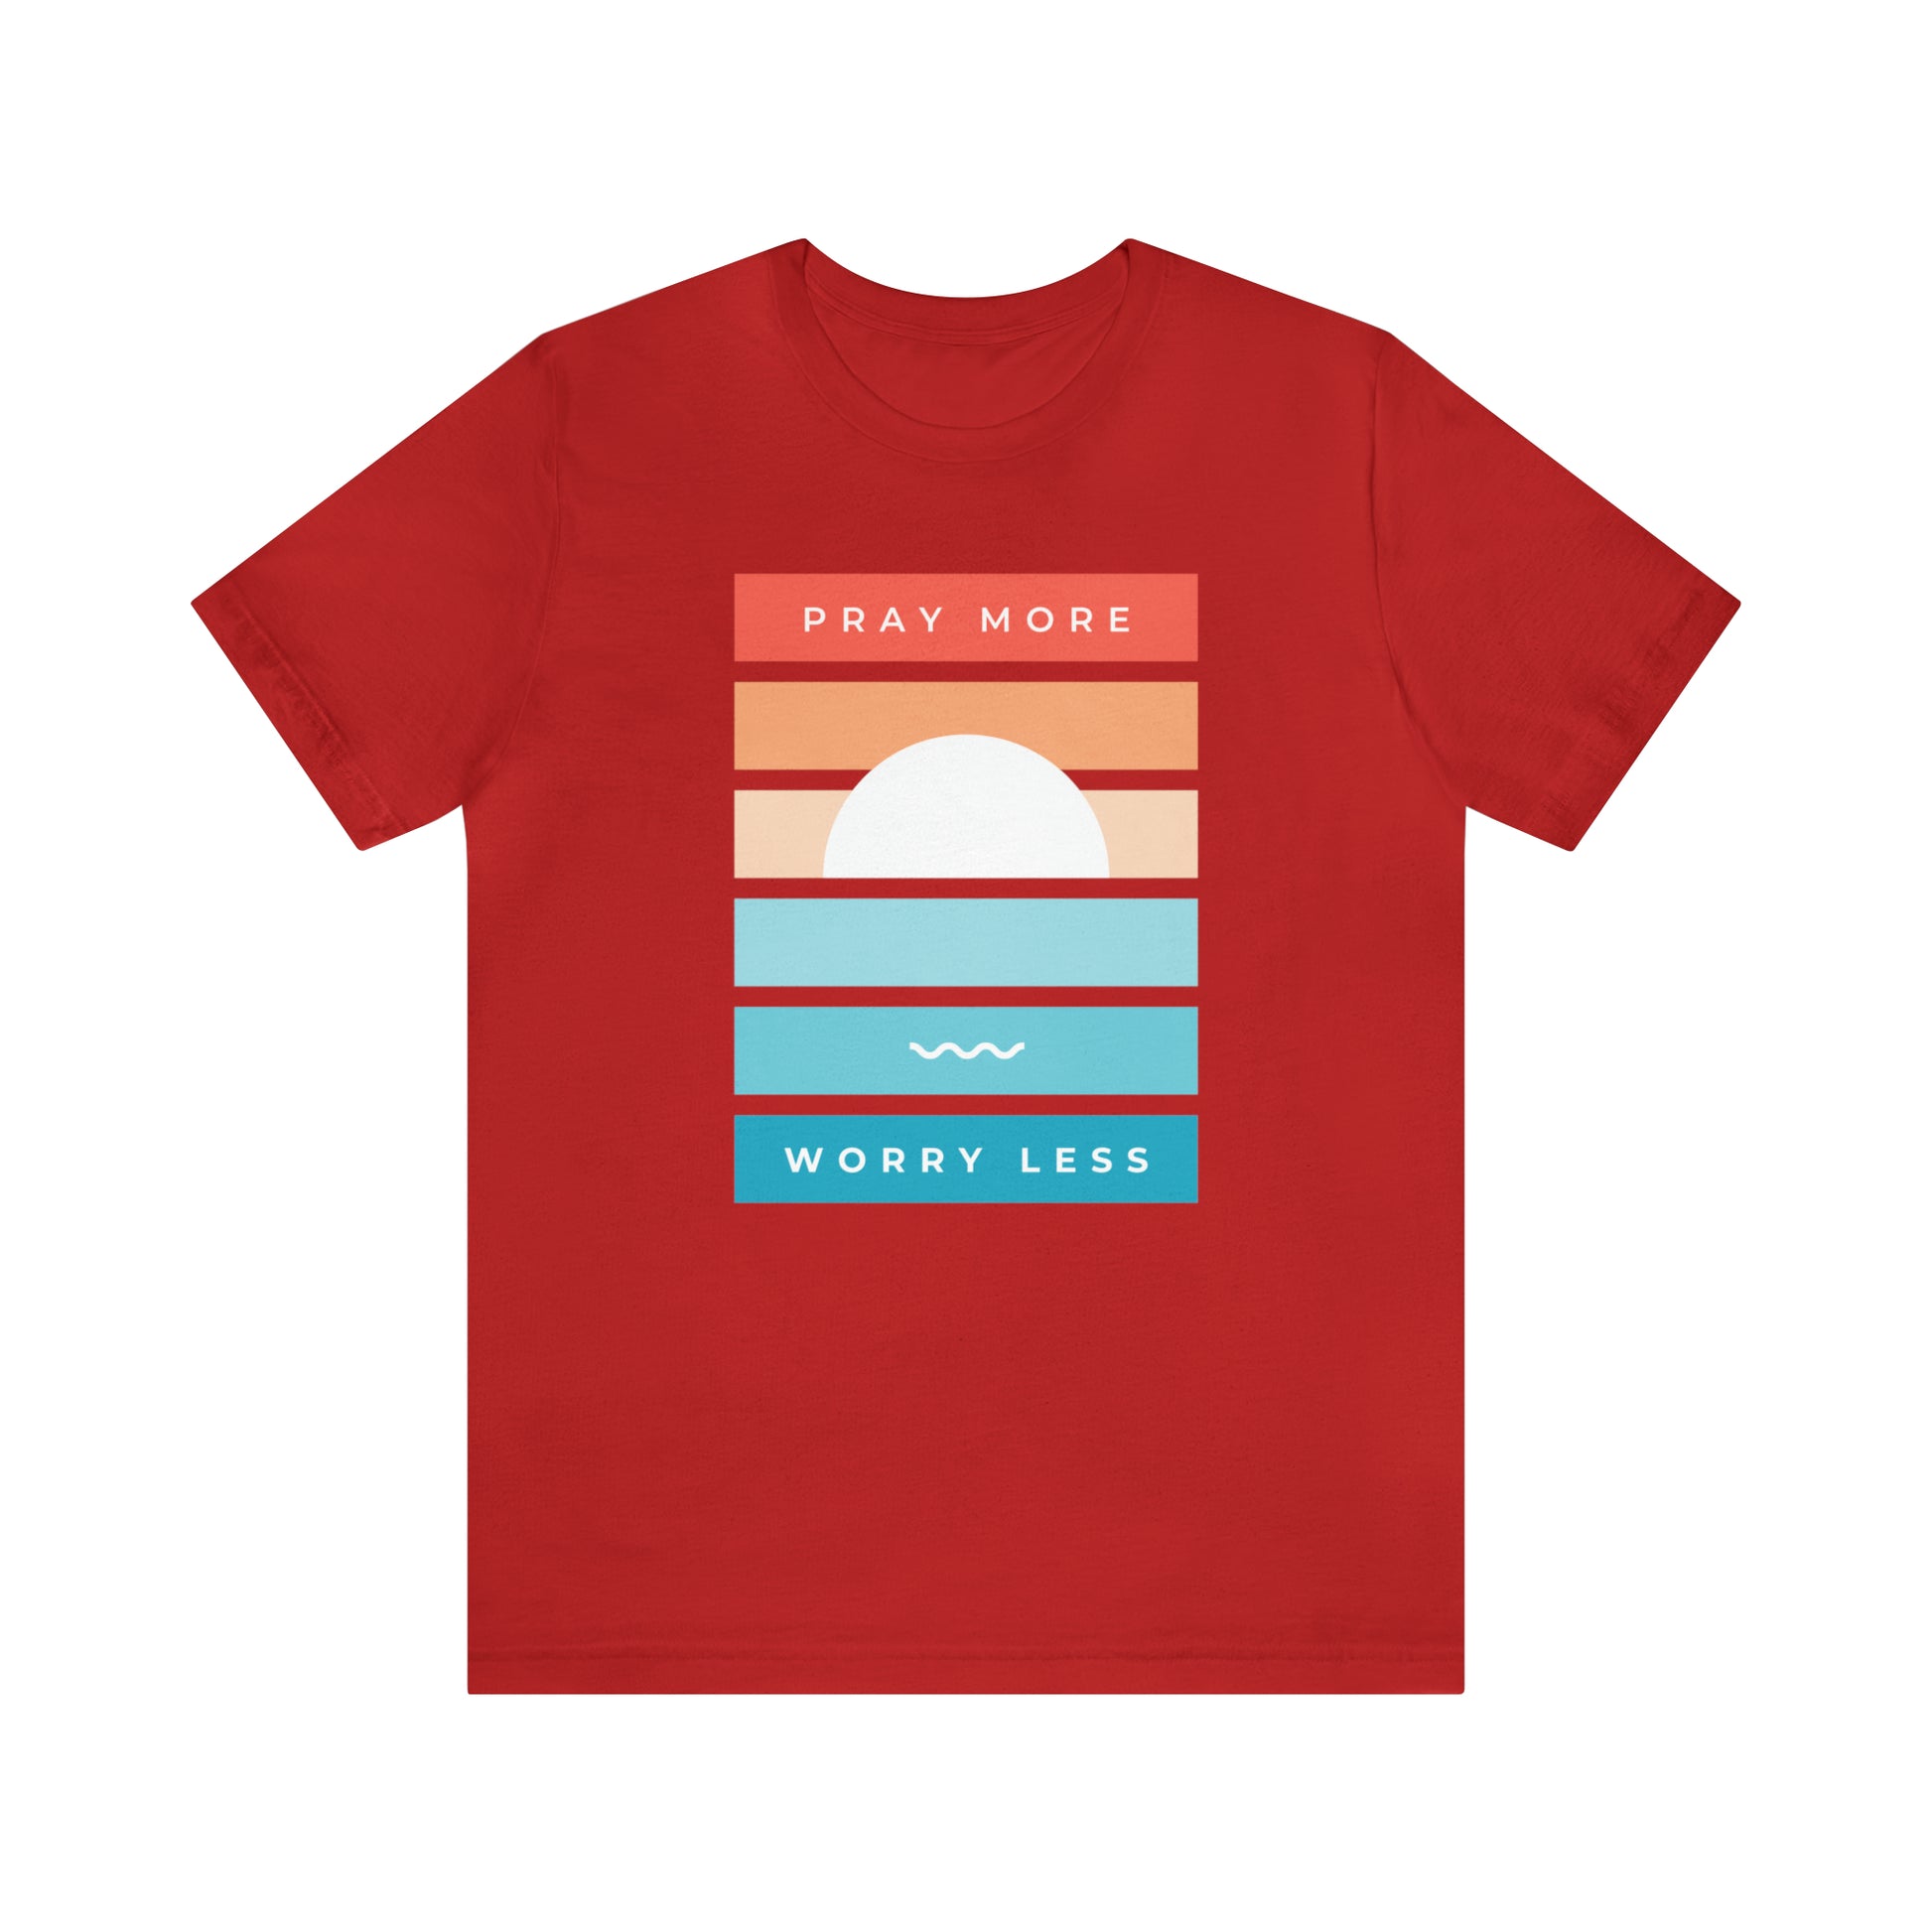 Pray More Worry Less T-Shirt - Sunset Graphic Christian Tee red